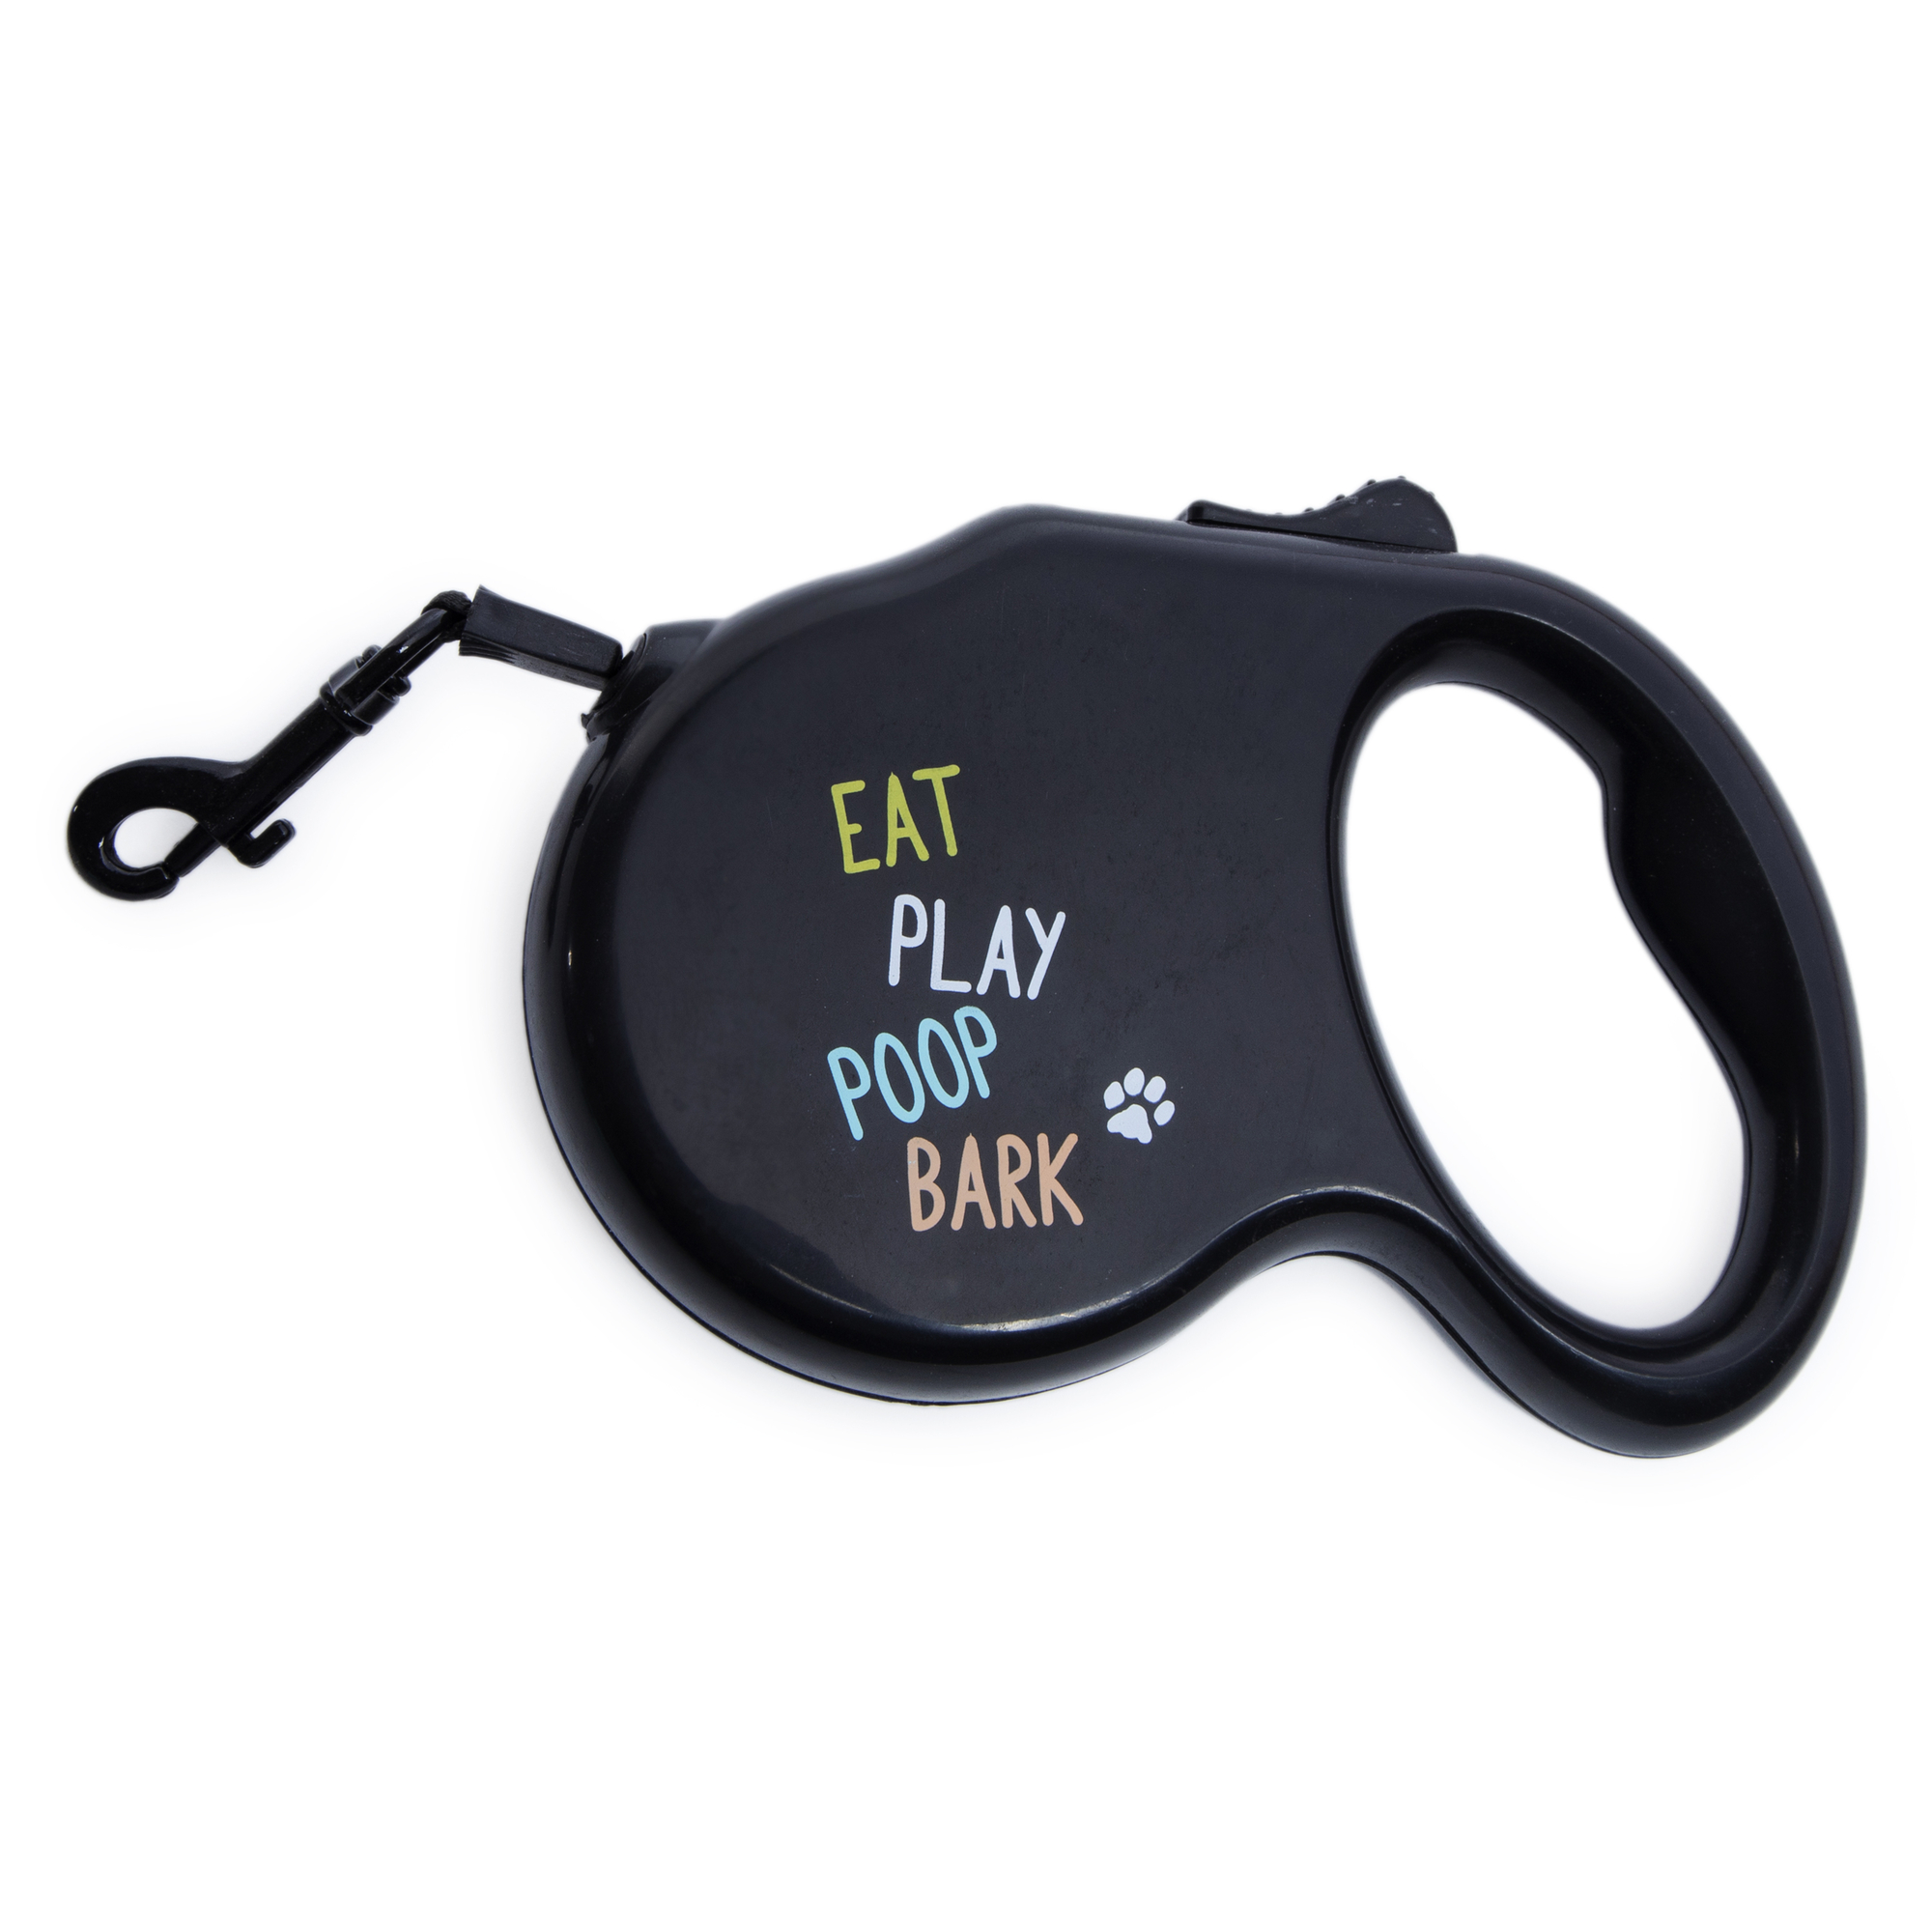 10ft retractable pet leash (dogs up to 30lbs)